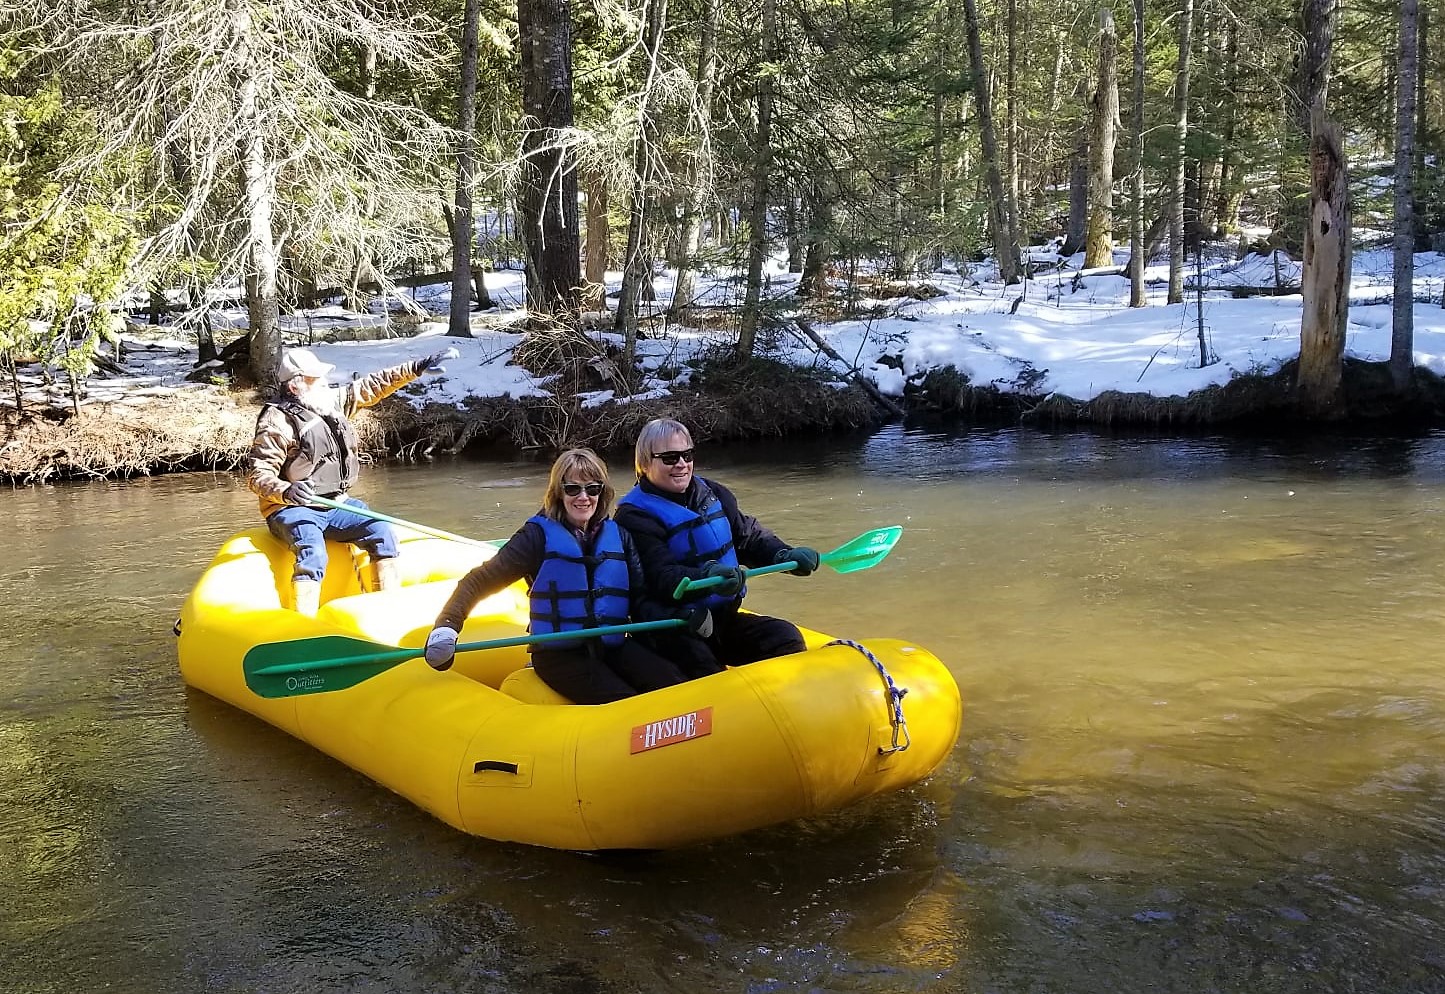 Unique things to do near Traverse City in the winter: raft the Jordan River!